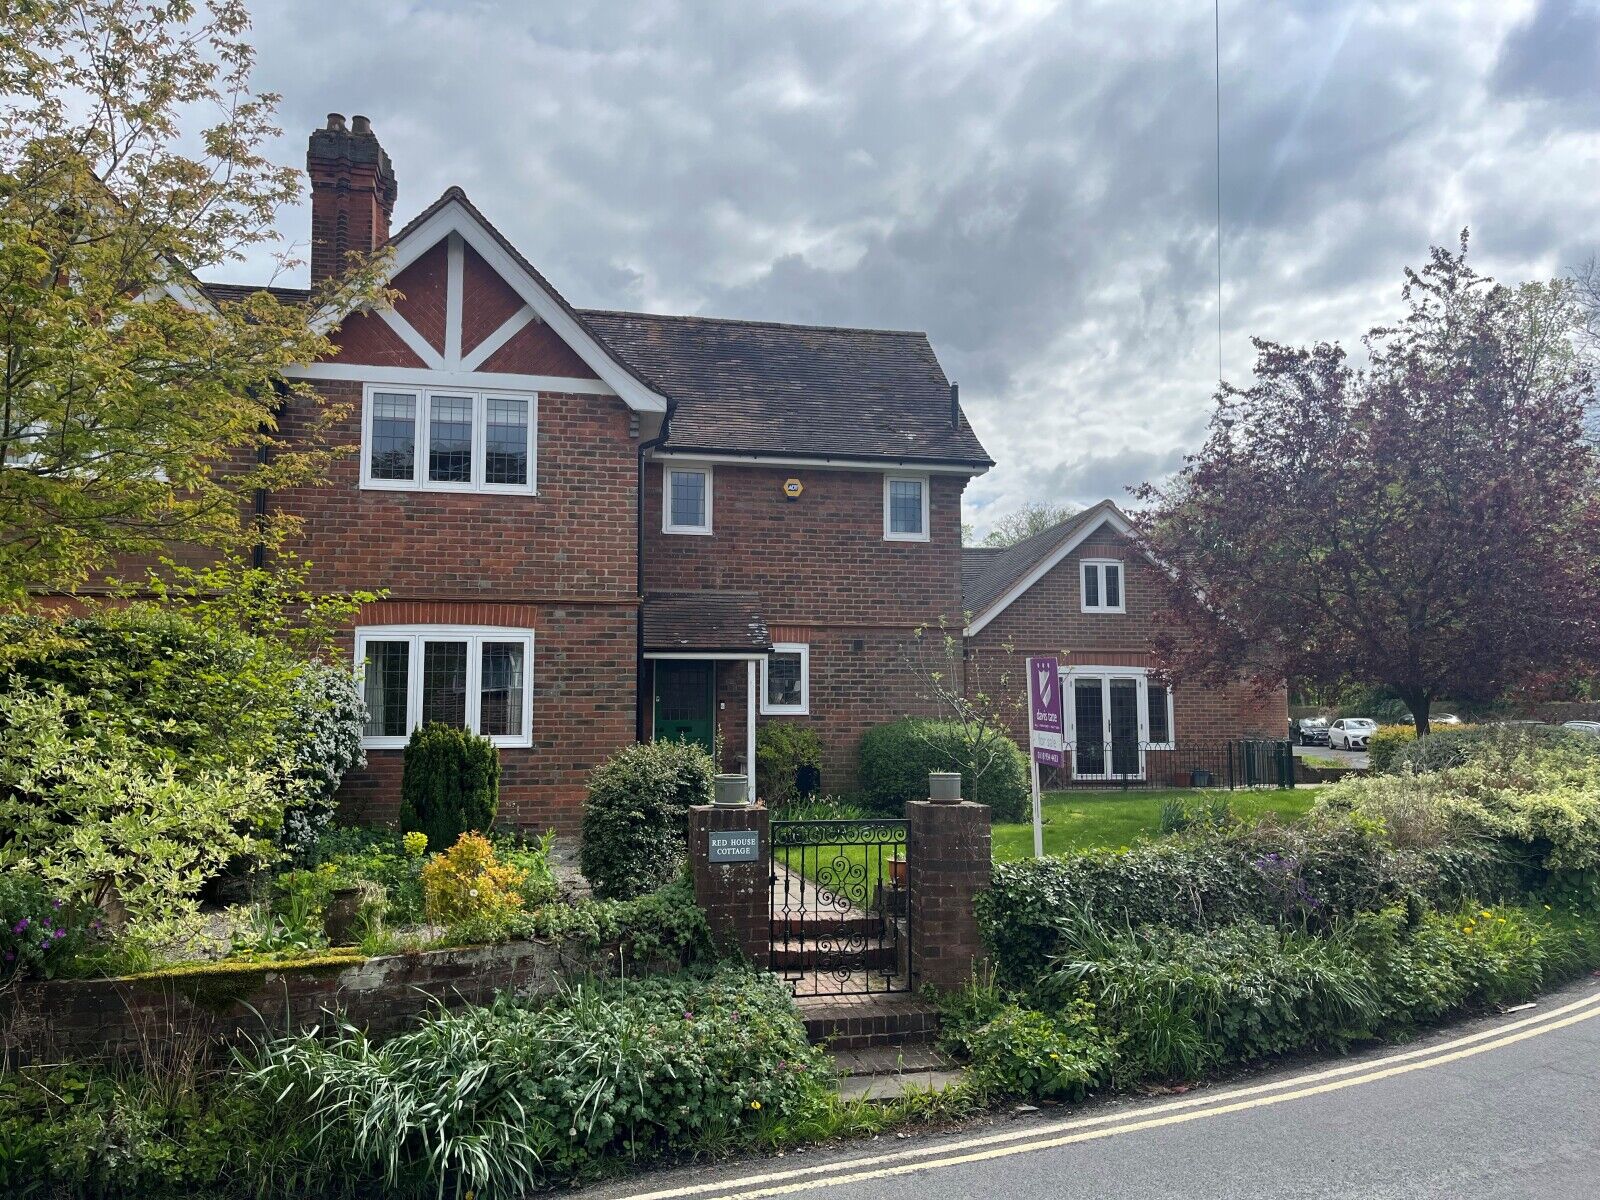 4 bedroom semi detached house for sale Pearson Road, Sonning, RG4, main image